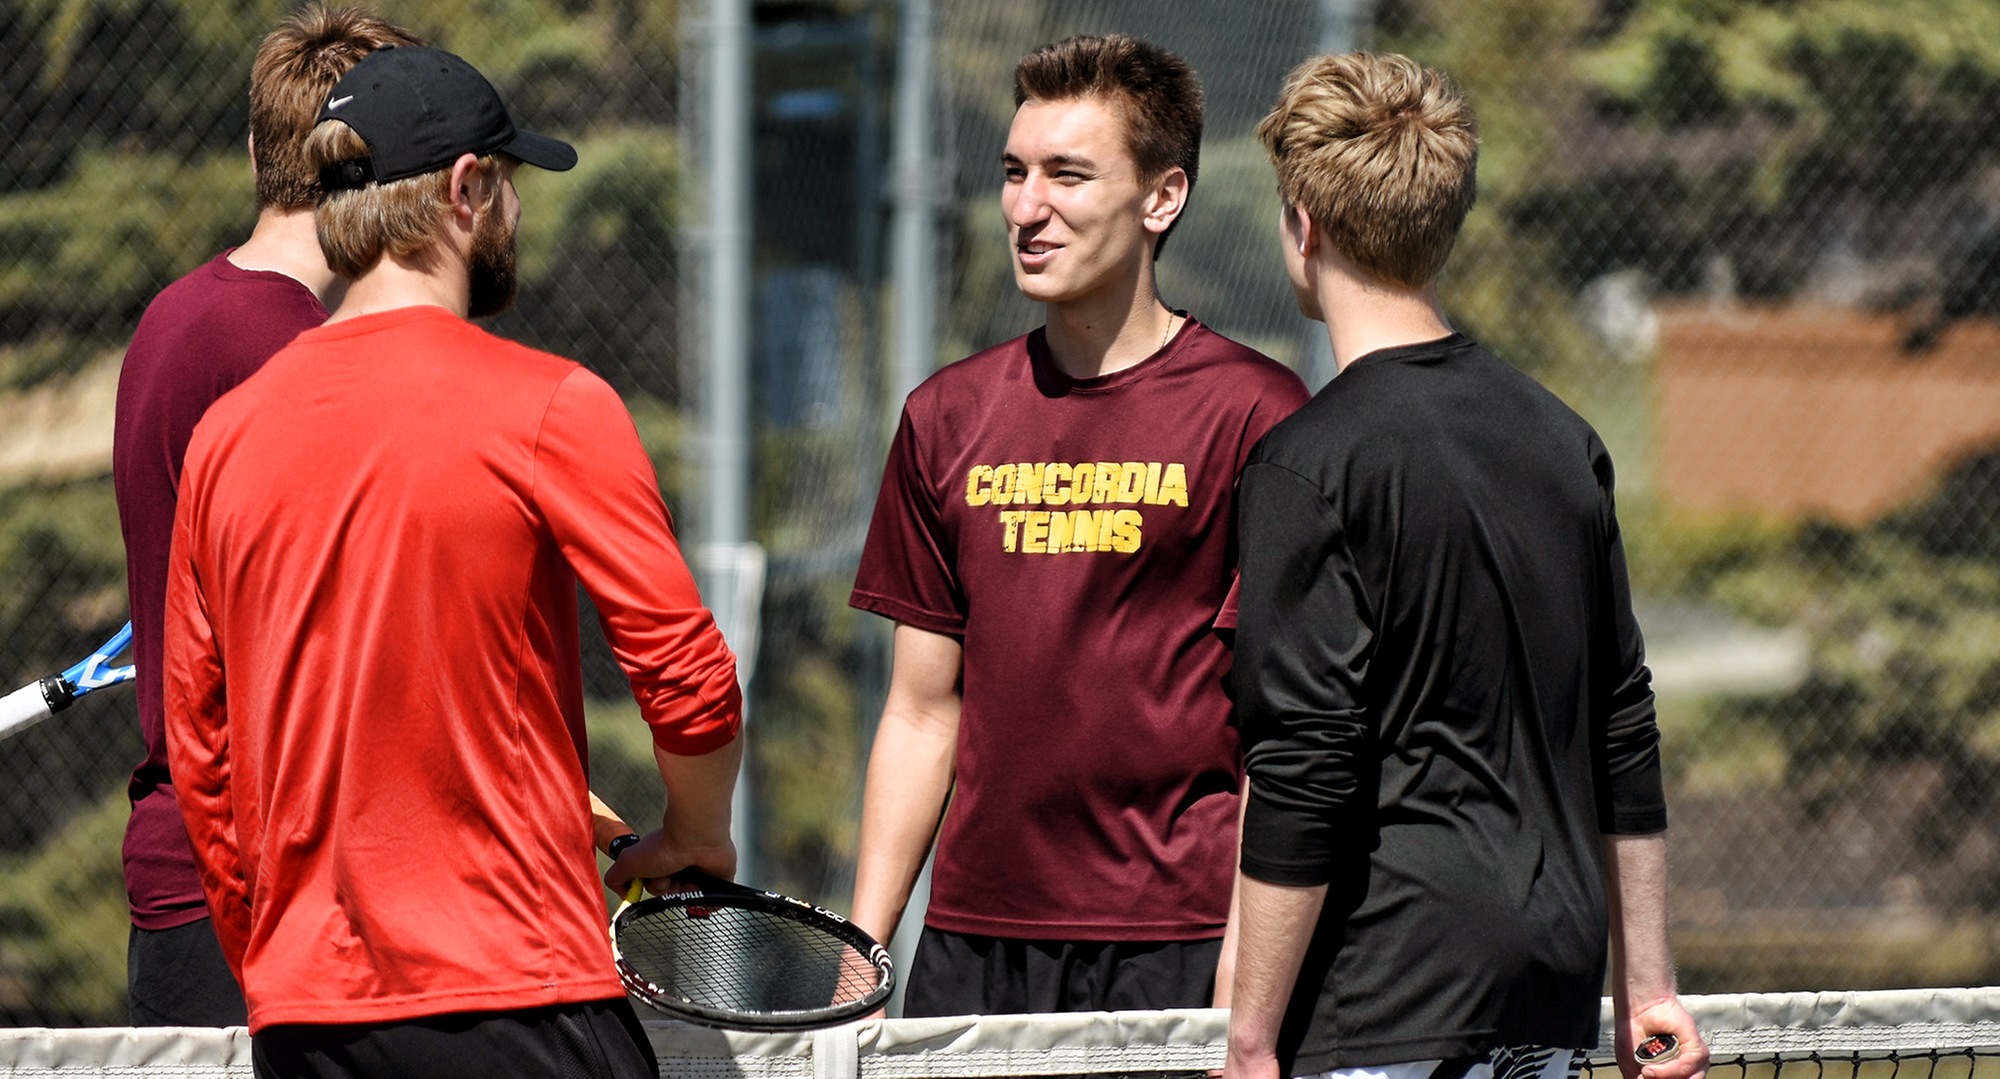 Senior Carter Steffes teamed with freshman Cole Gillespie to earn one of the three doubles wins in the Cobbers' victory over Midway. Gillespie also won in singles play.